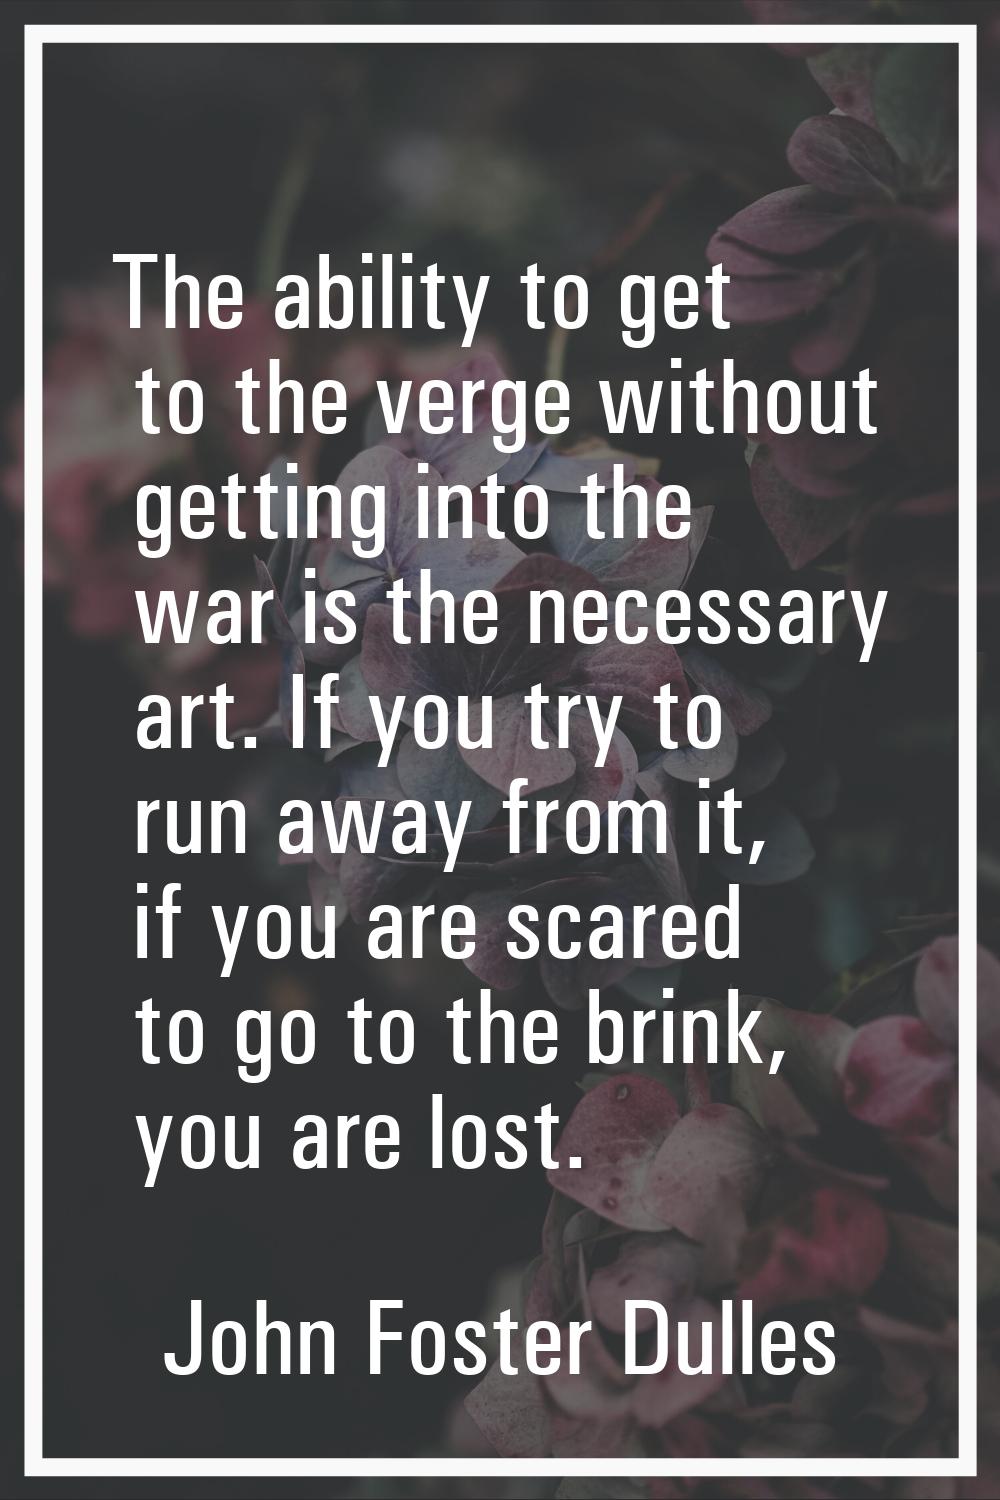 The ability to get to the verge without getting into the war is the necessary art. If you try to ru